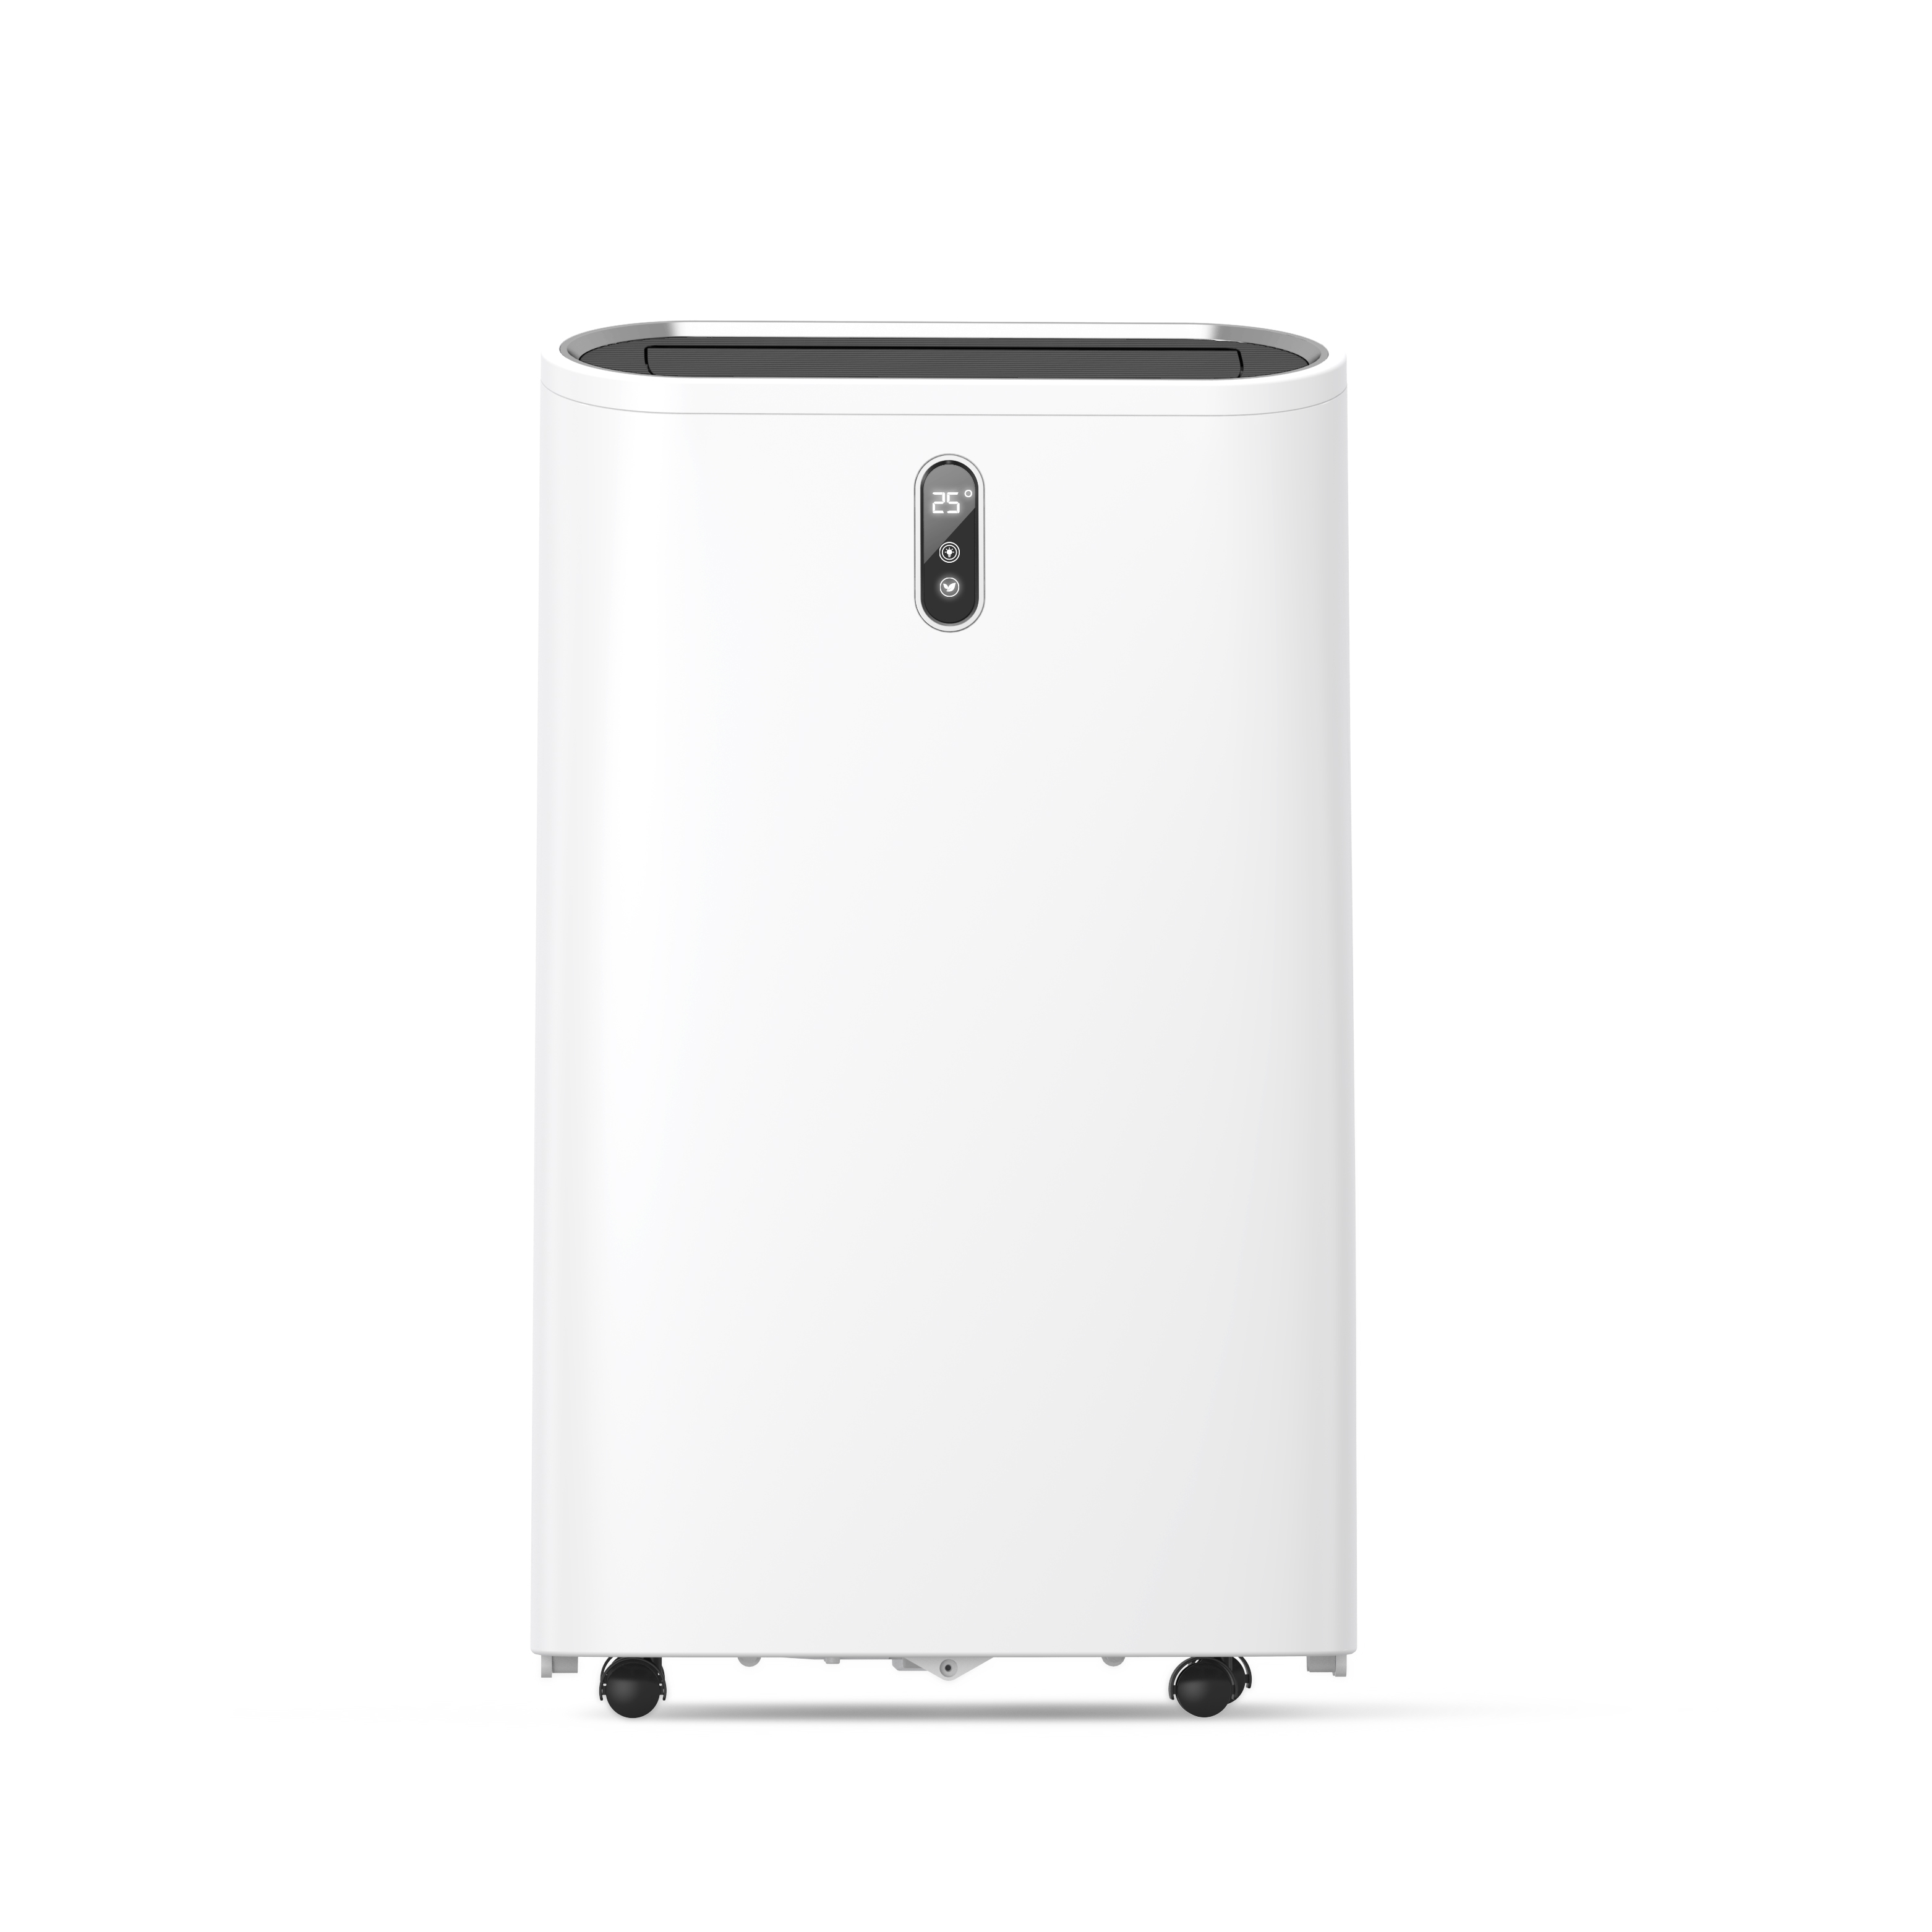 Portable Air Conditioner Personal Ac Air Conditioner Hot And Cold Featured Image